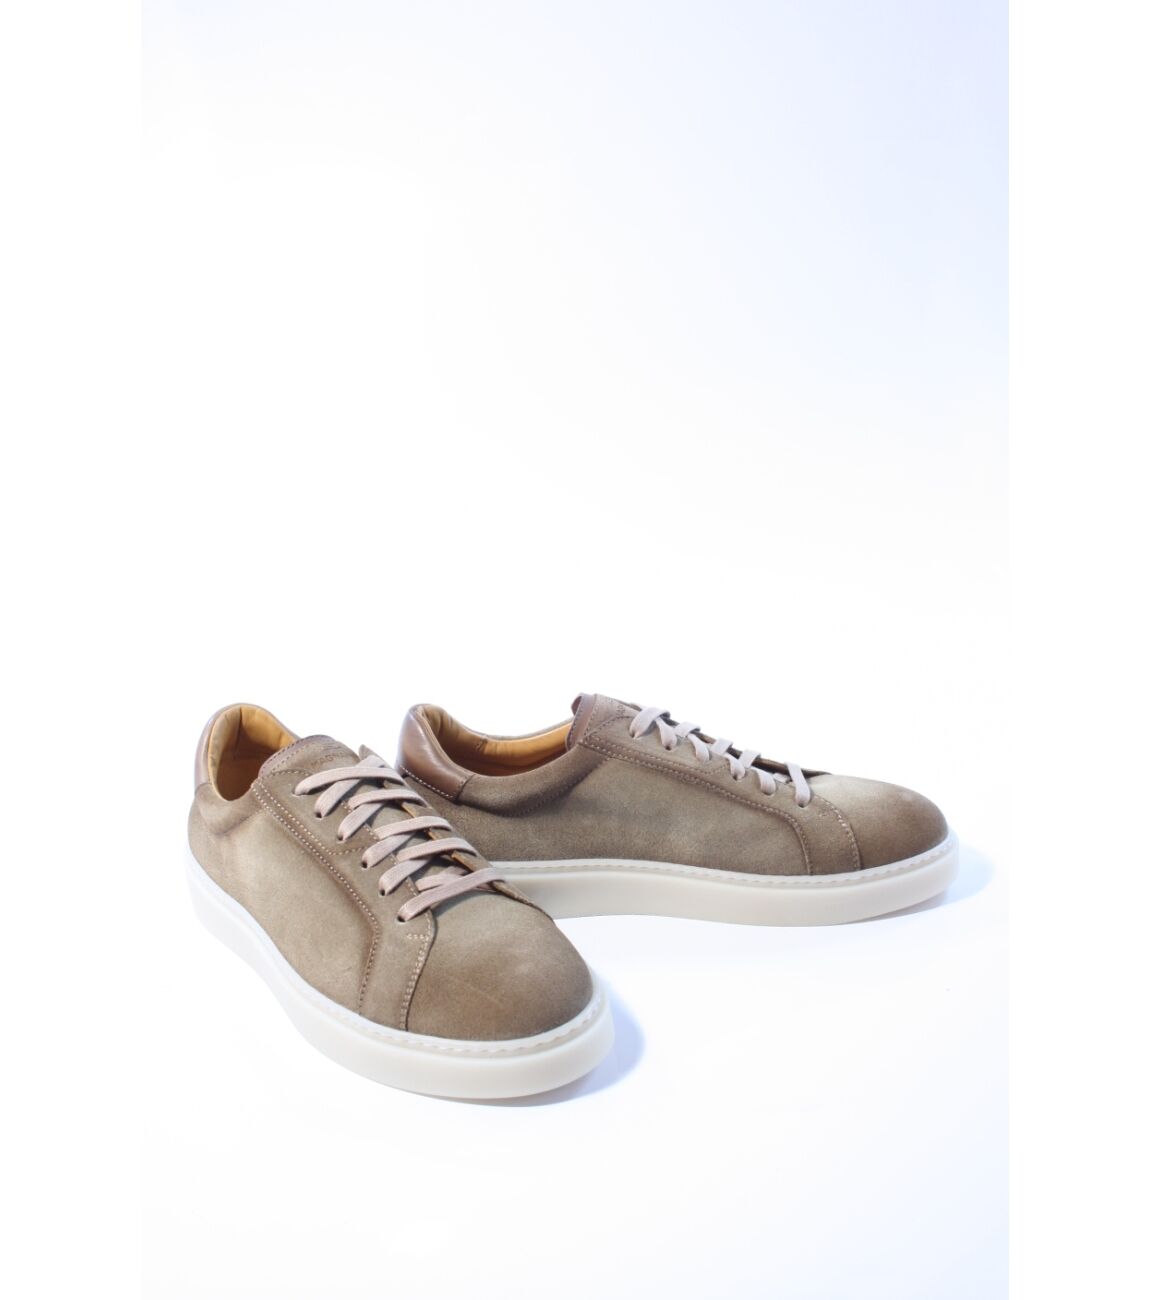 Magnanni Heren sneakers taupe 44